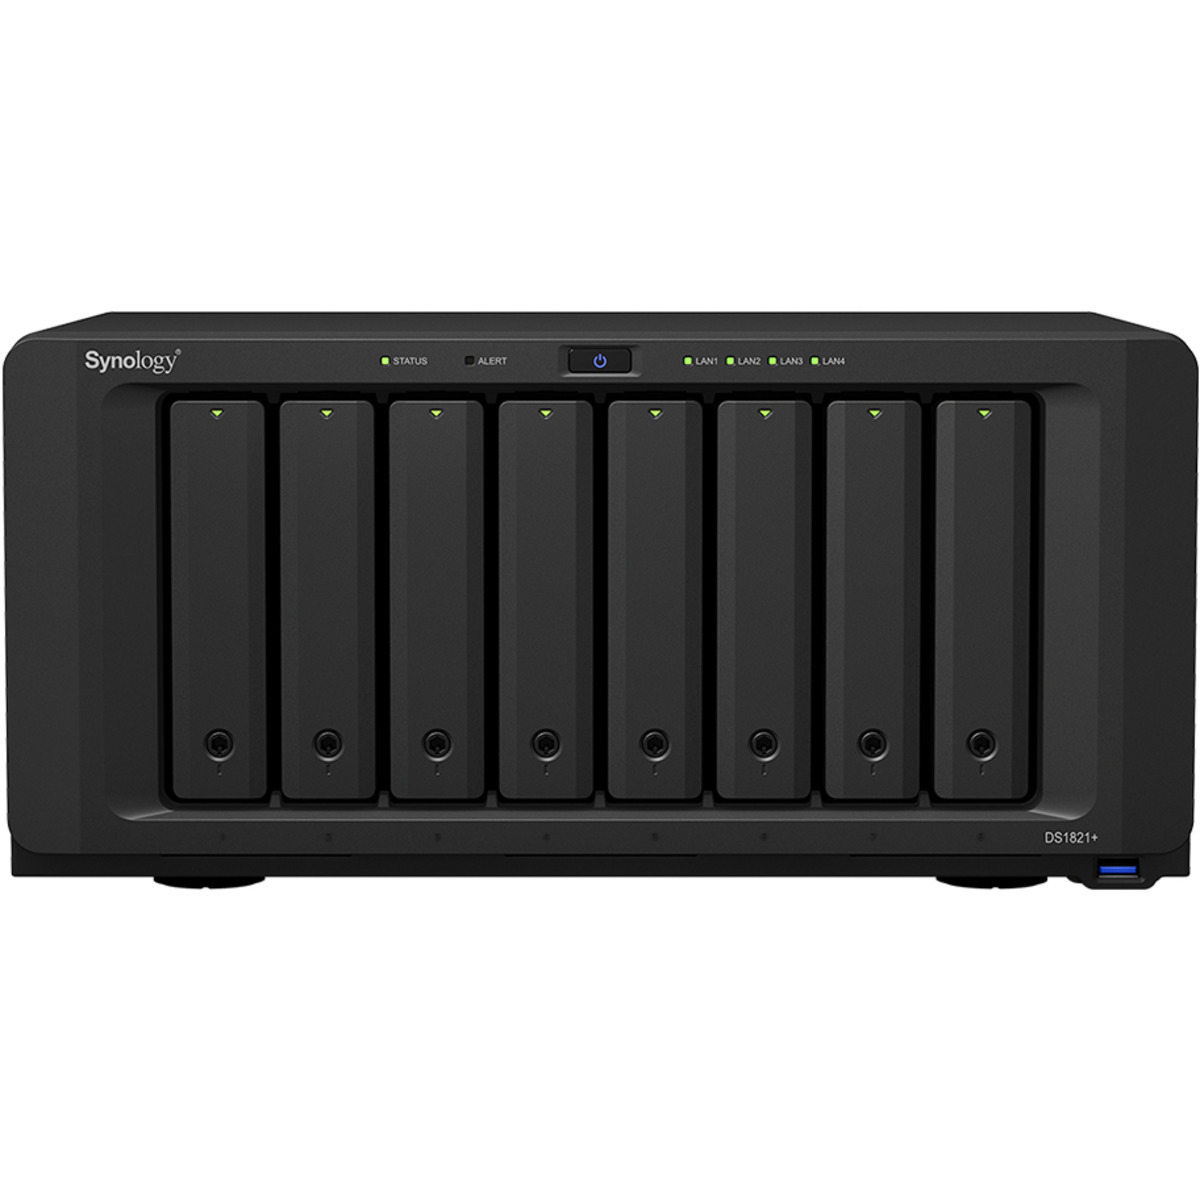 Synology DiskStation DS1821+ 144tb 8-Bay Desktop Multimedia / Power User / Business NAS - Network Attached Storage Device 6x24tb Western Digital Ultrastar HC580 SED WUH722424ALE6L1 3.5 7200rpm SATA 6Gb/s HDD ENTERPRISE Class Drives Installed - Burn-In Tested - FREE RAM UPGRADE DiskStation DS1821+